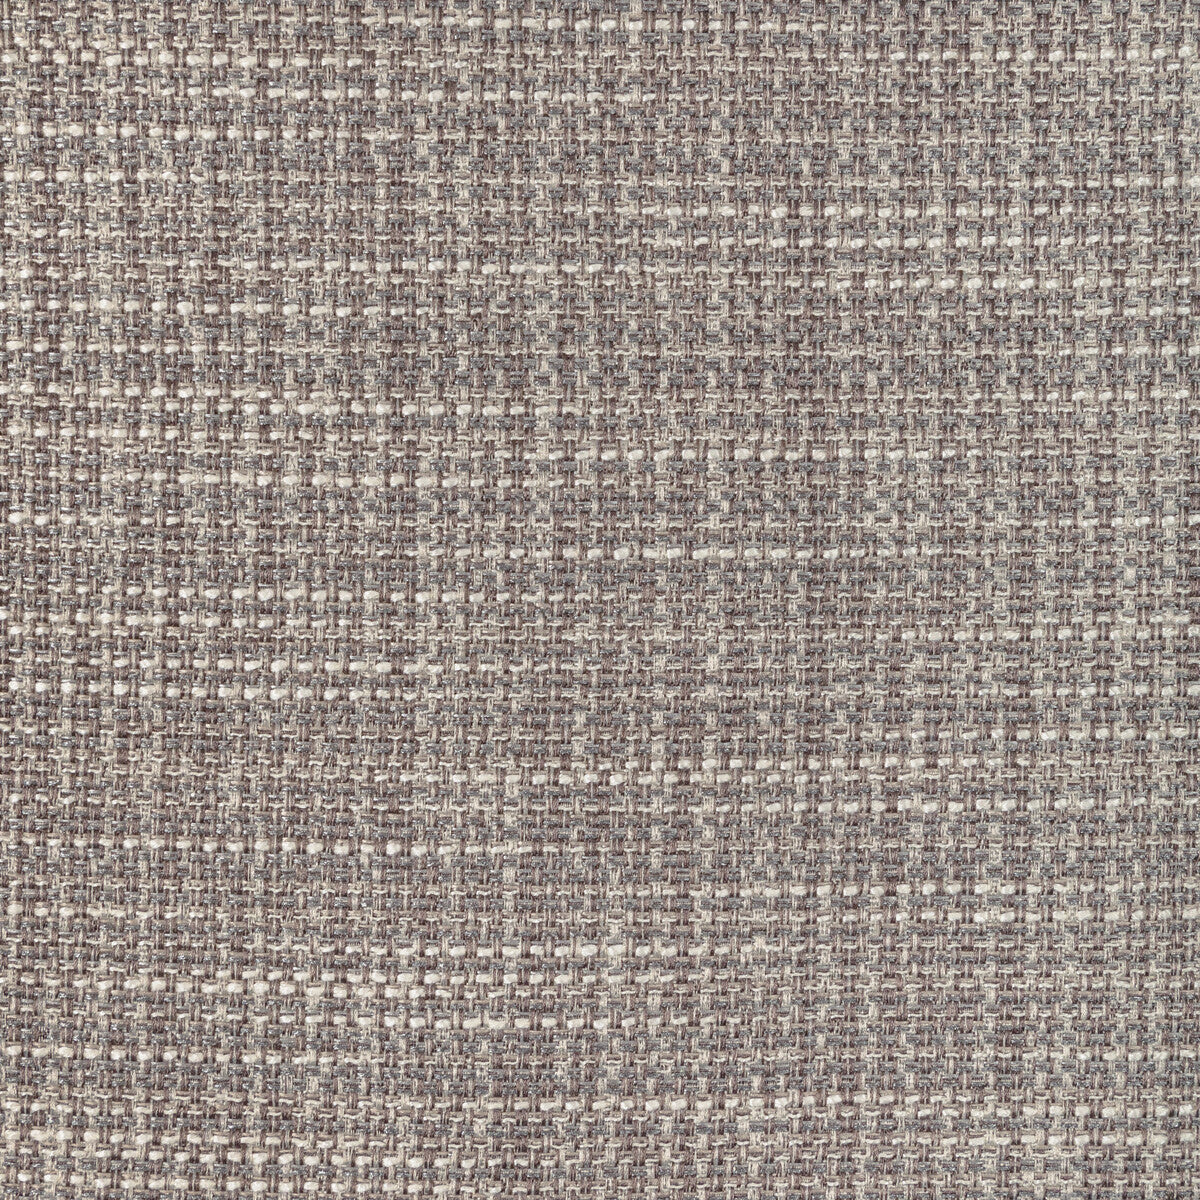 Luma Texture fabric in stone color - pattern 4947.2111.0 - by Kravet Contract in the Fr Window Luma Texture collection